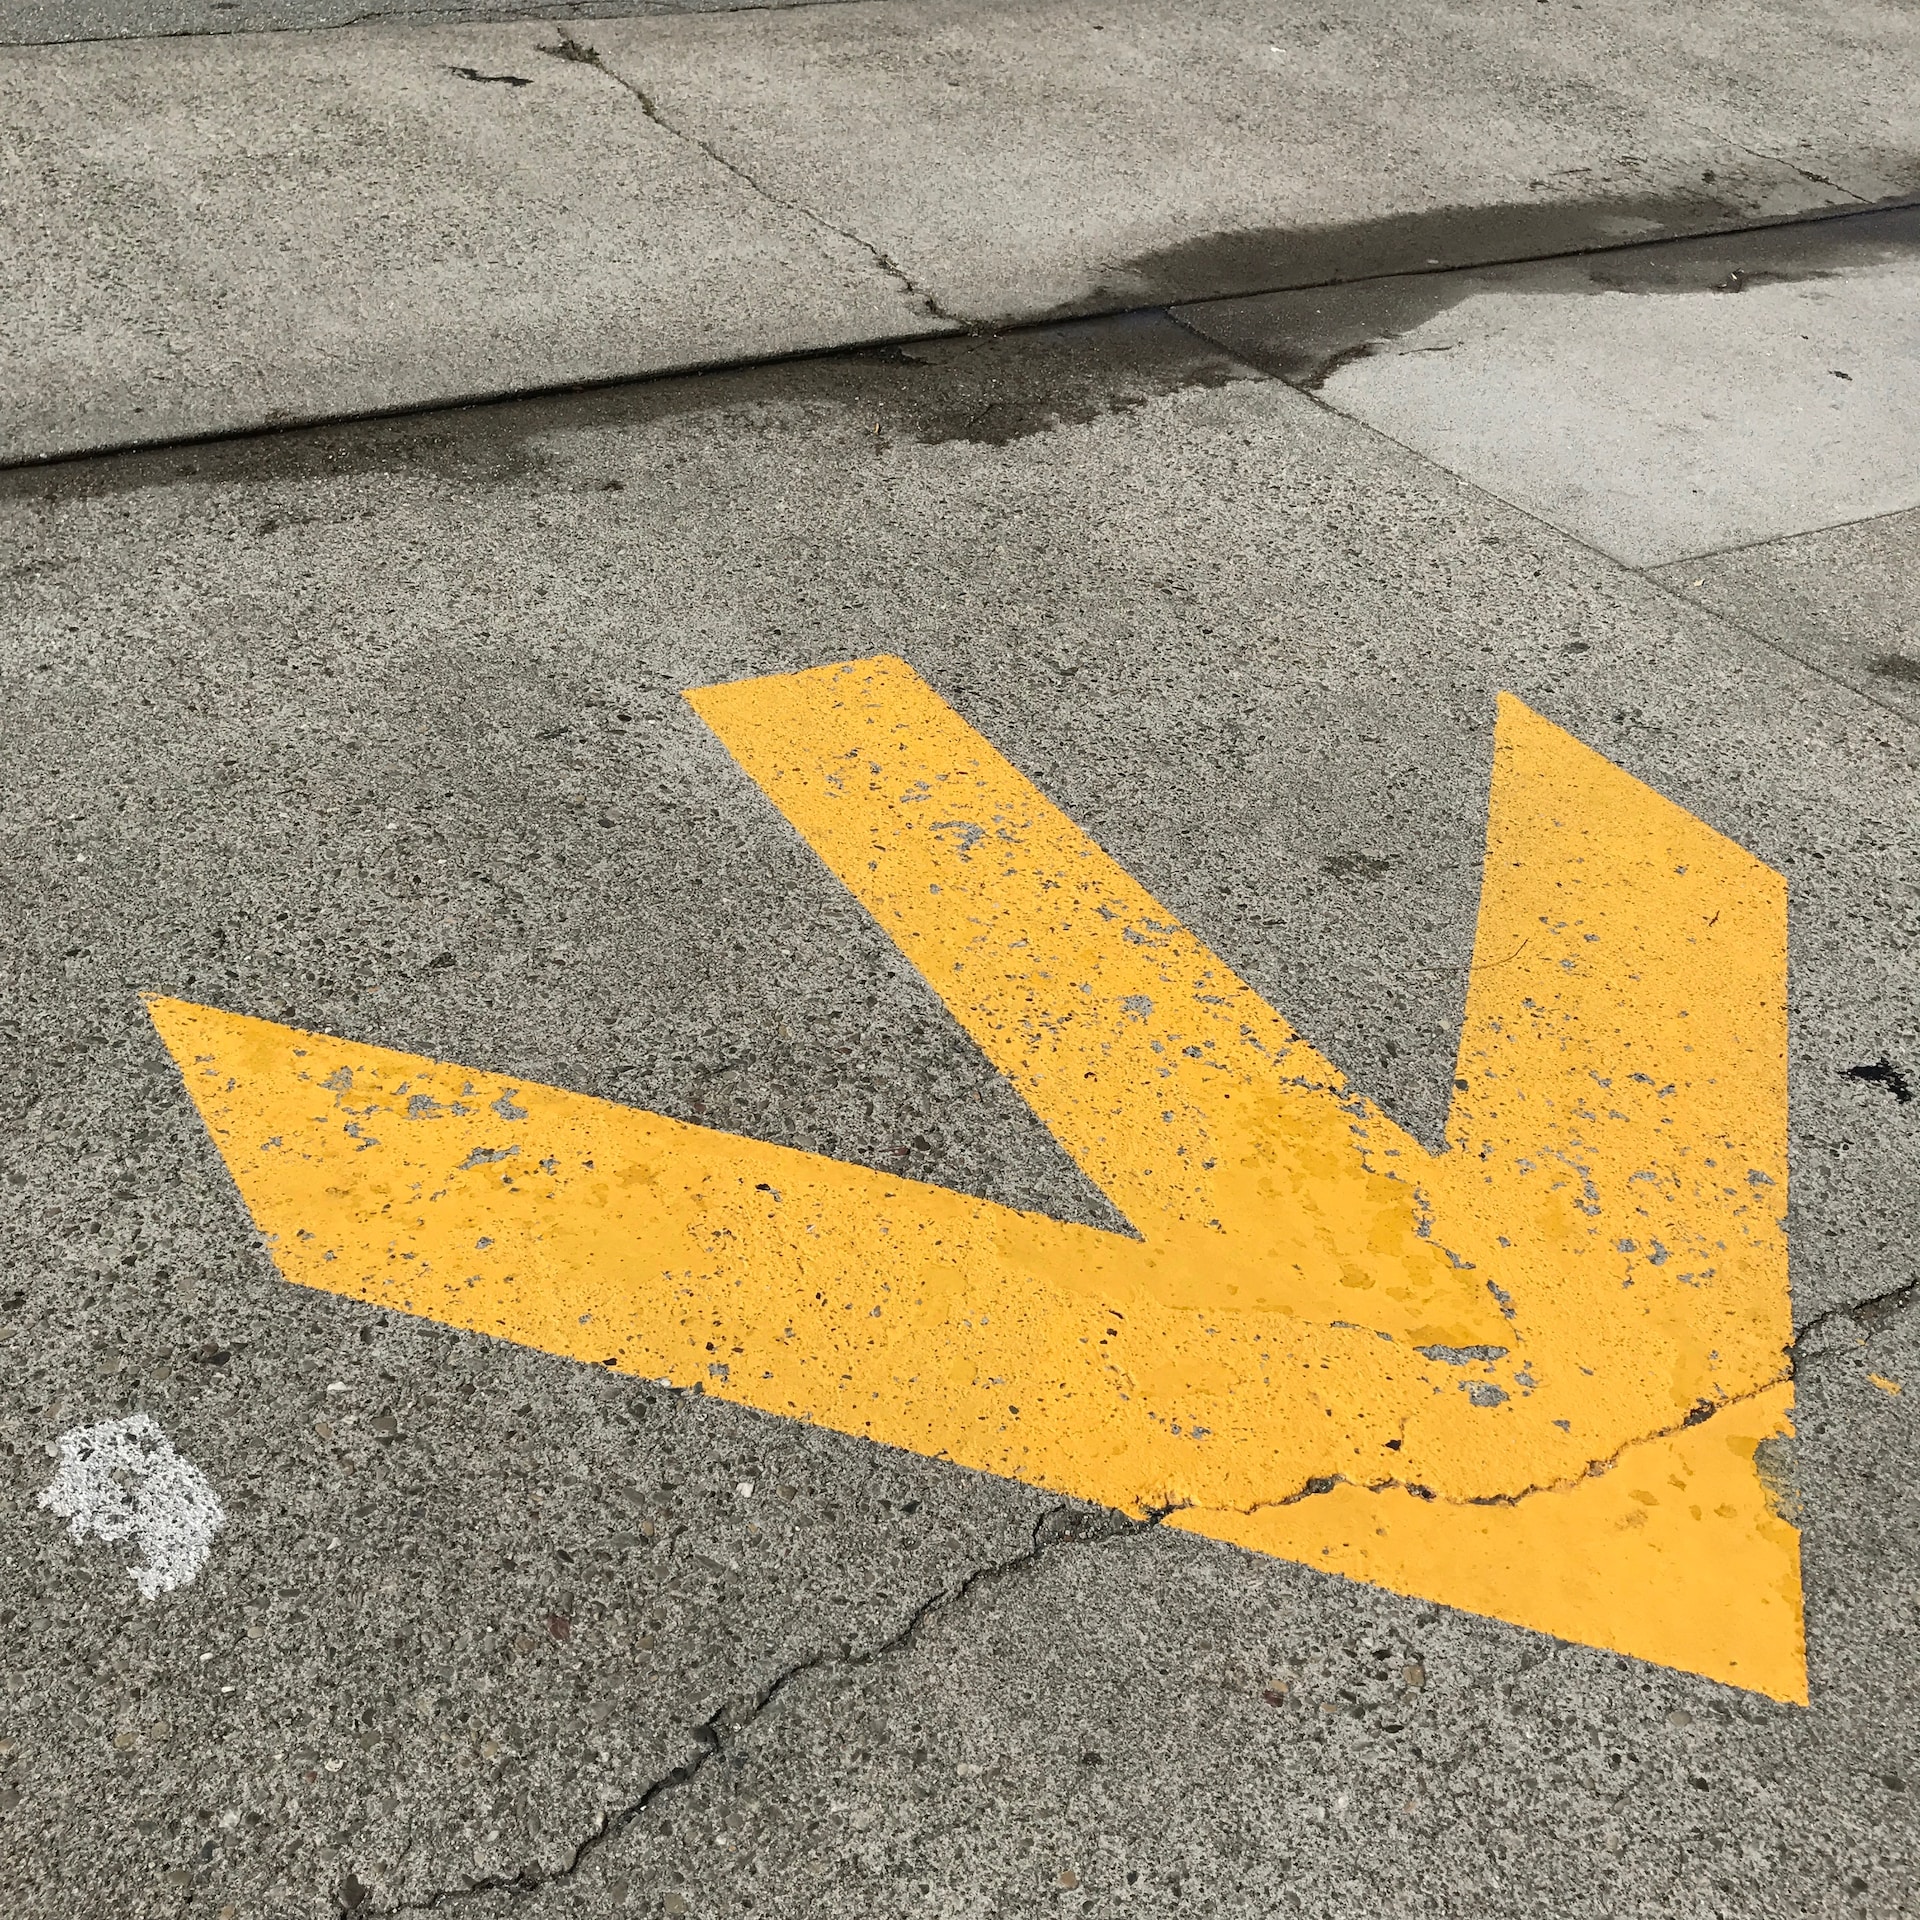 A yellow arrow on a road